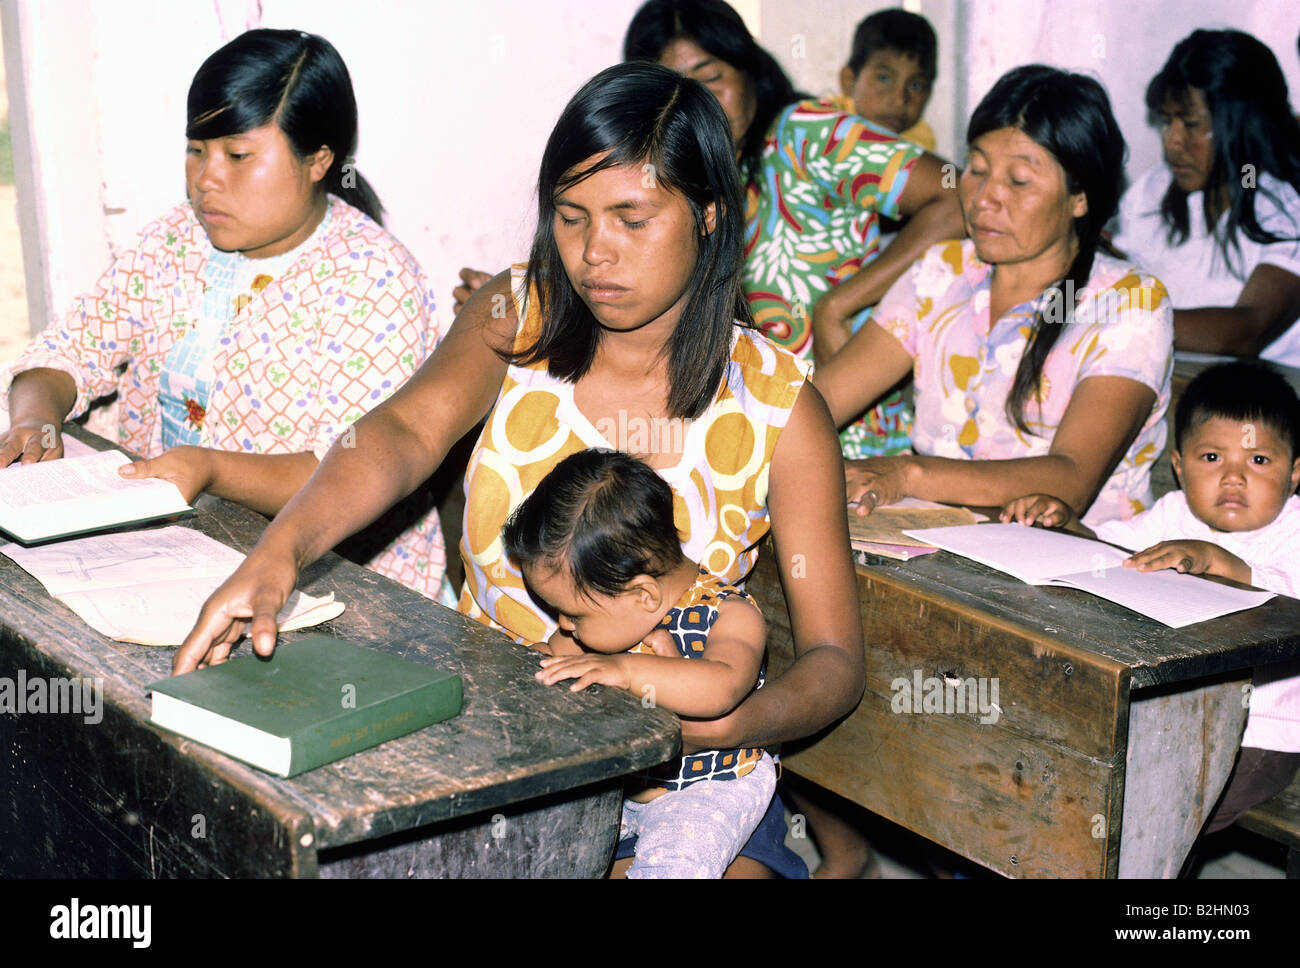 people, women, indigenous women in a catholic mission school, Chaco, Paraguay, ethnic, ethnology, Central America, indigena, for Stock Photo